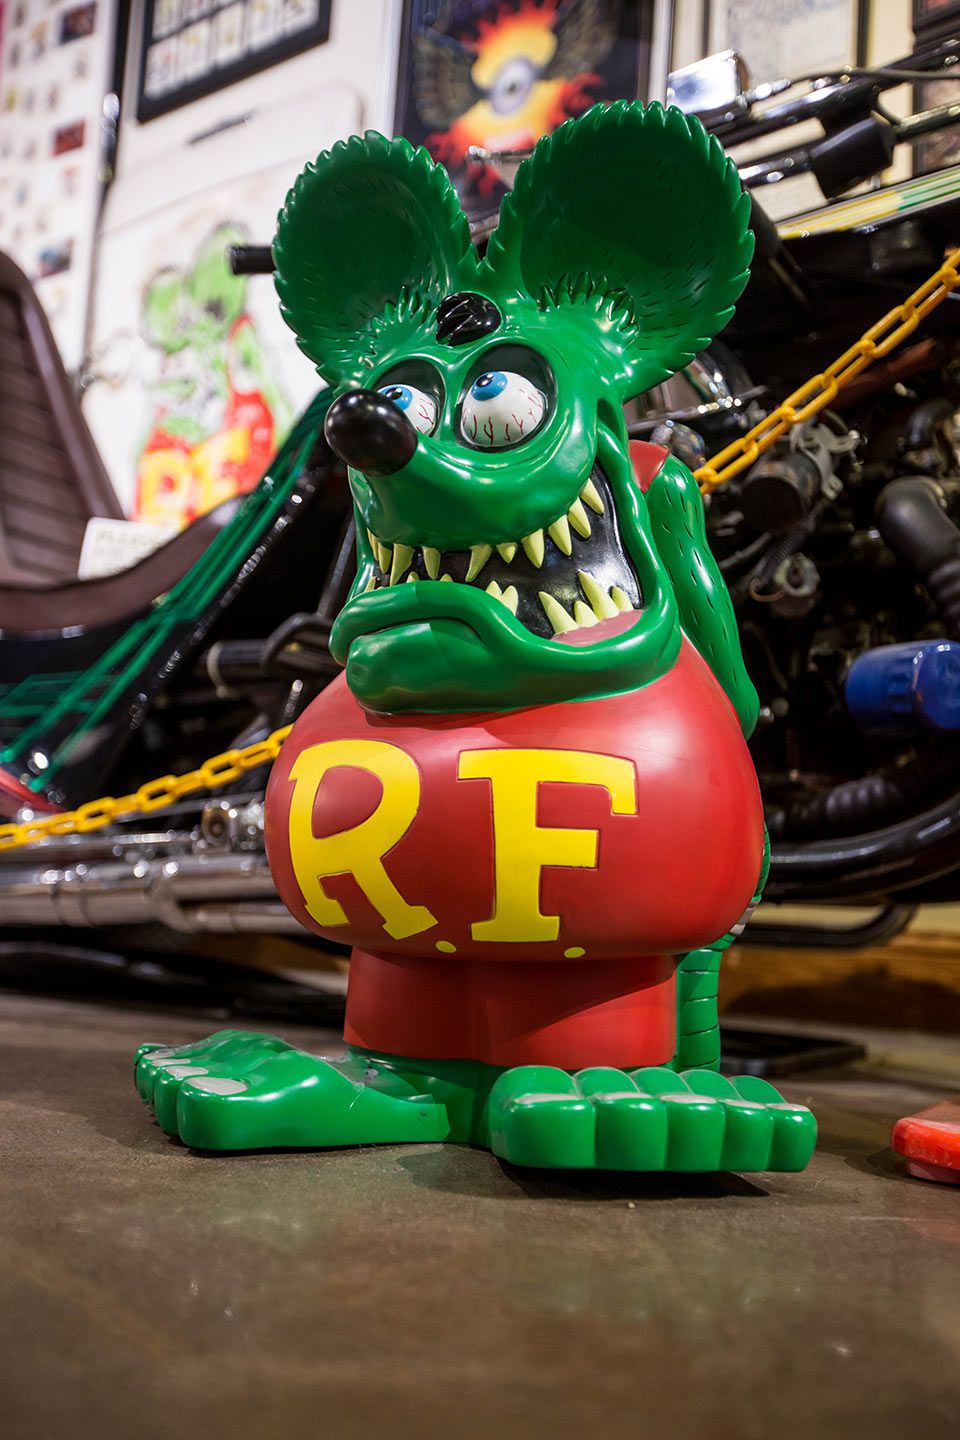 The museum featured many trinkets from “Kustom Kulture” king, Ed “Big Daddy” Roth.